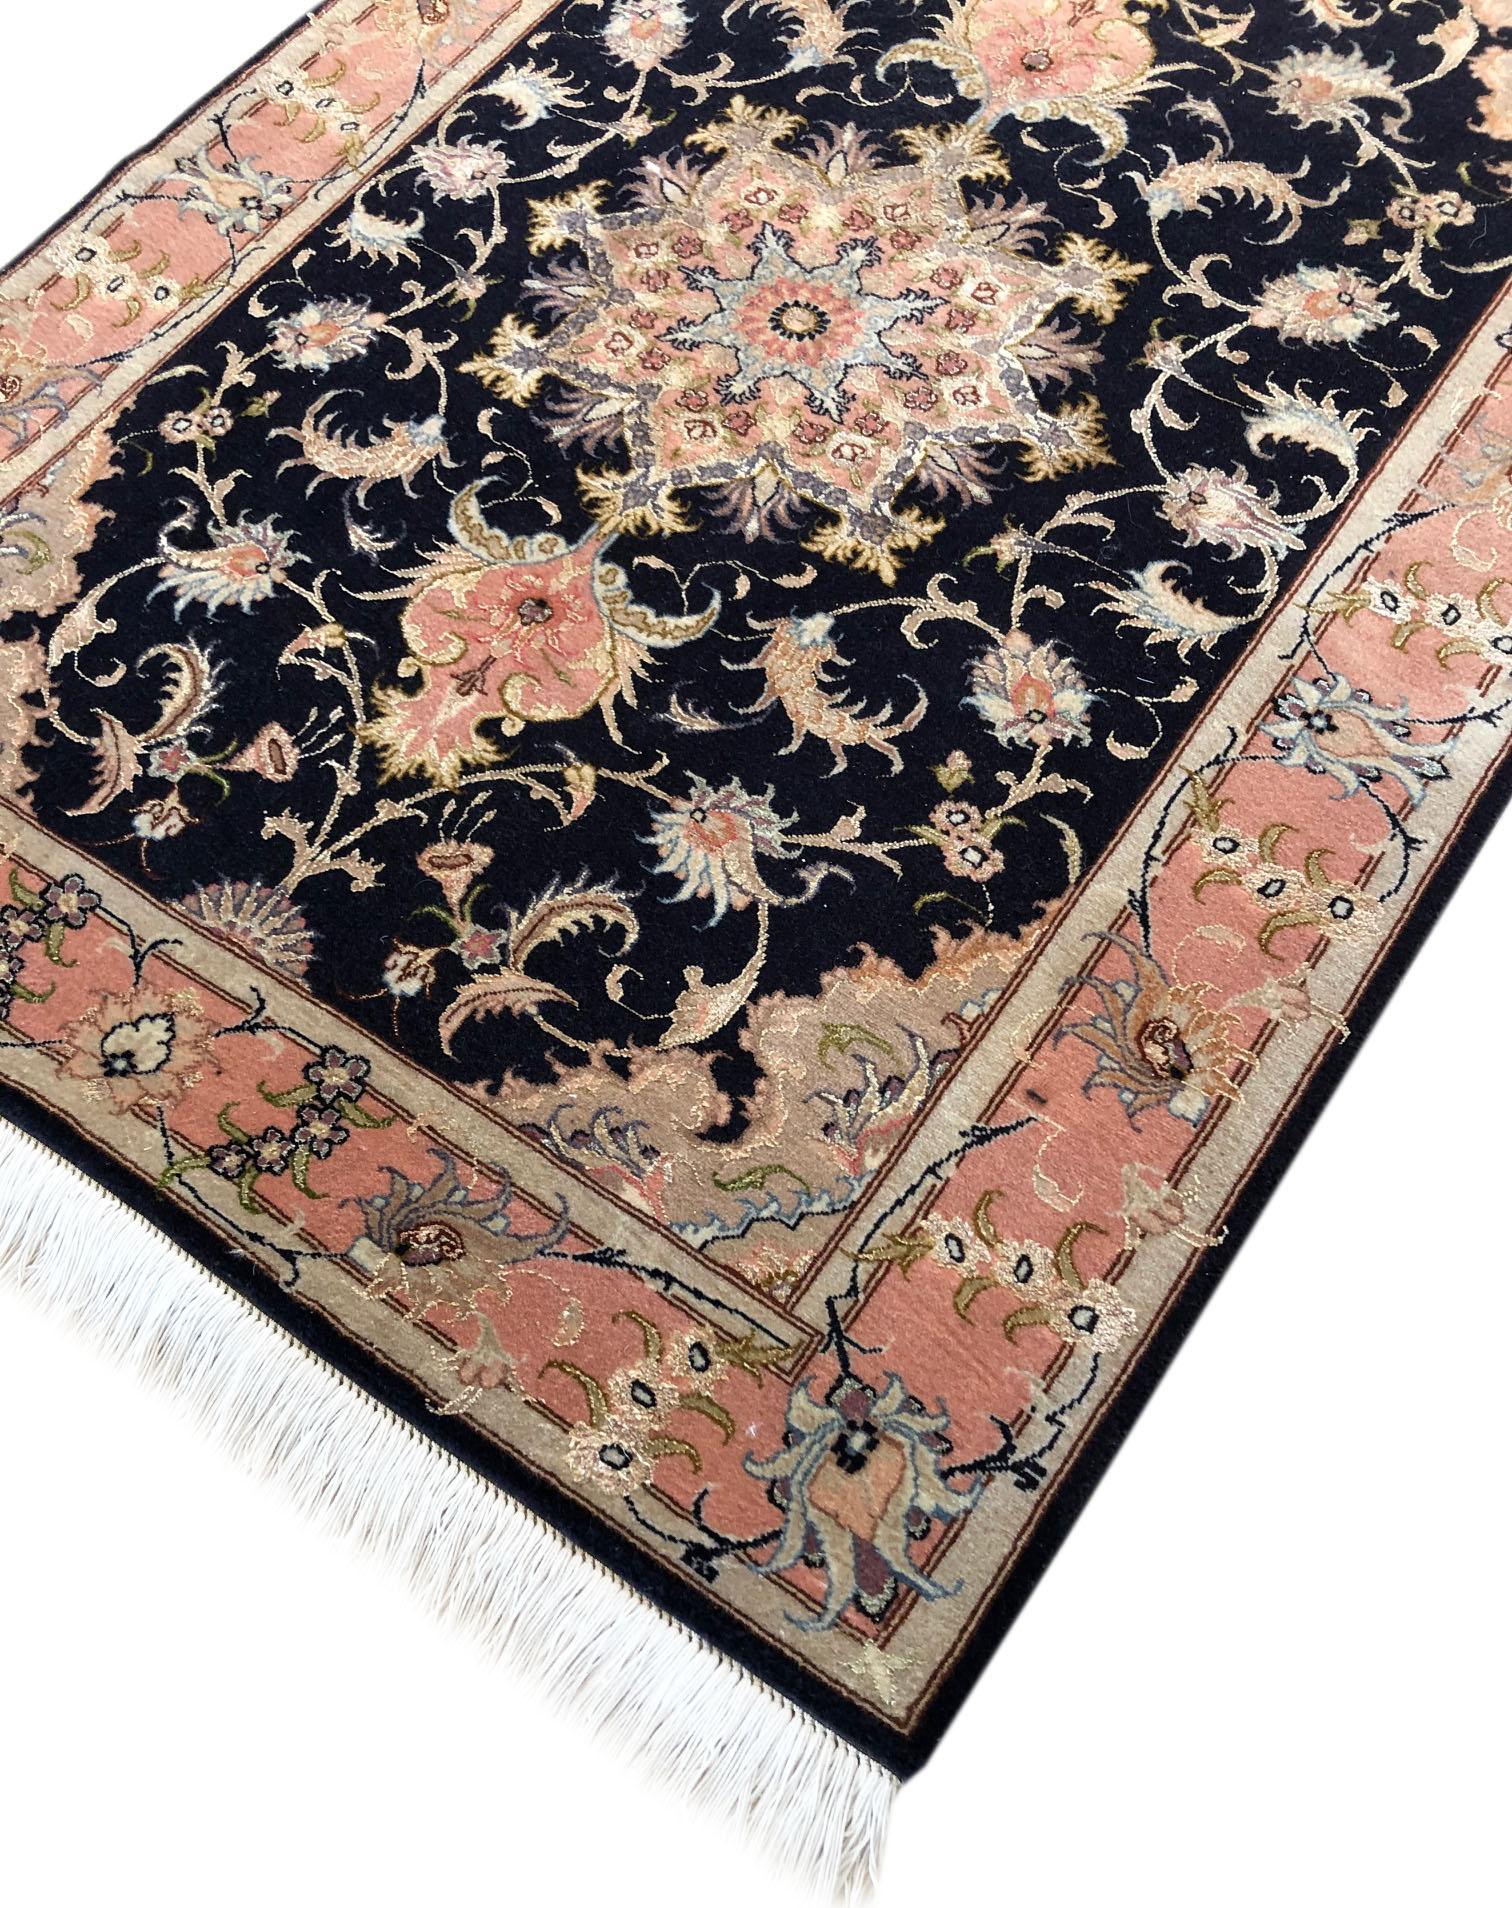 Authentic Persian Hand Knotted Repeated Medallion Floral Tabriz Black Runner Rug For Sale 6